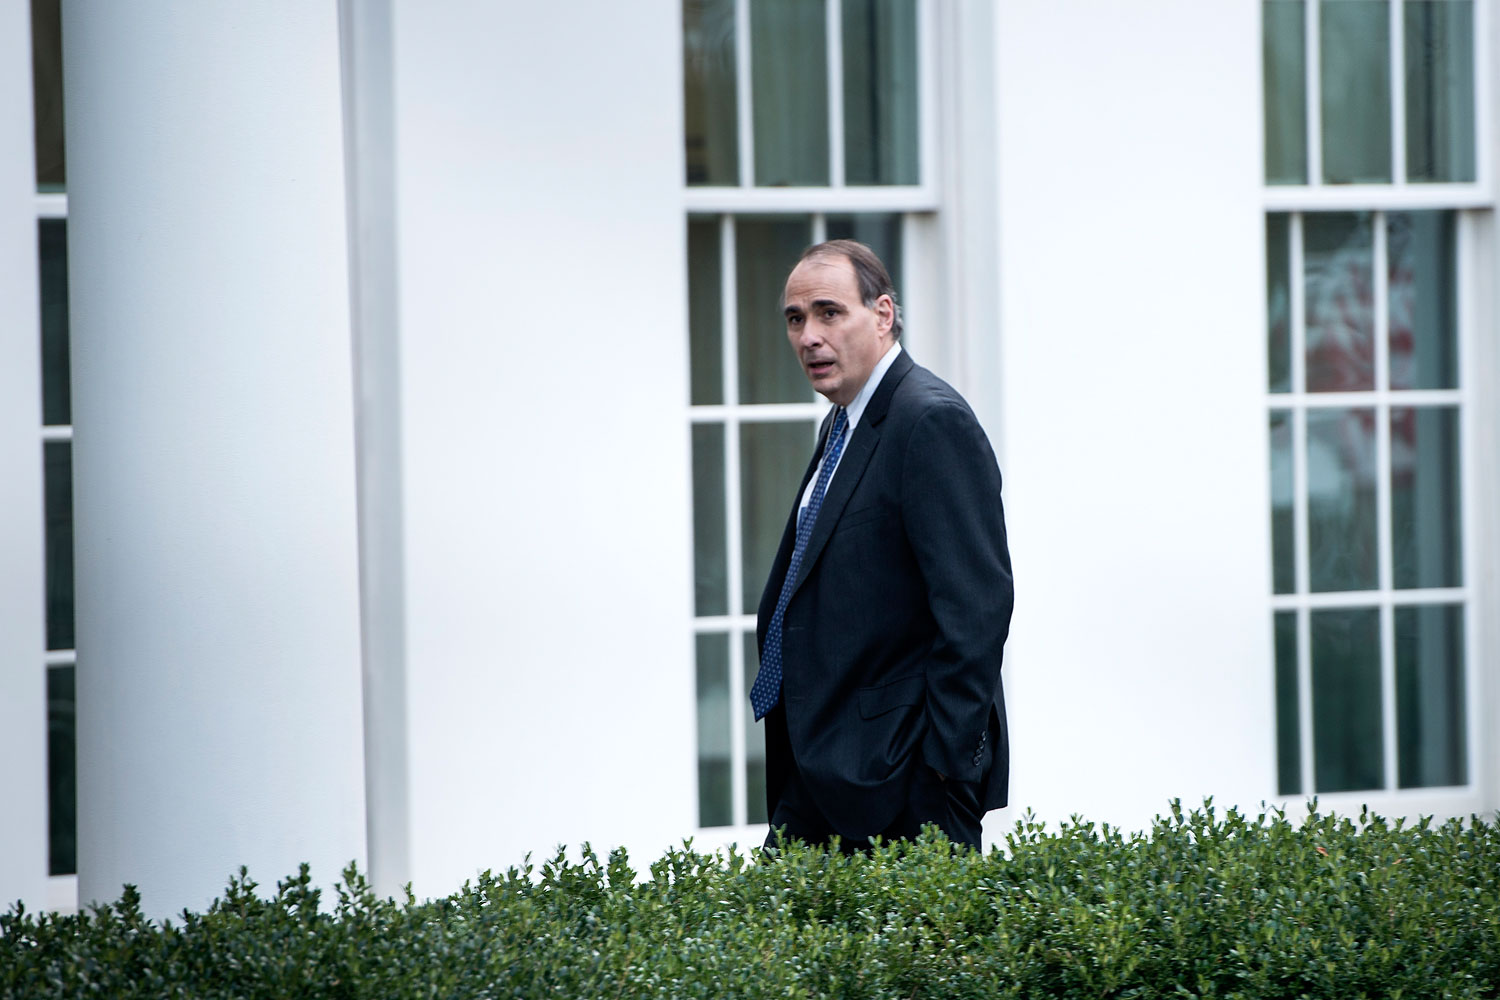 US-POLTICS-Former White House advisor David Axelrod walks into the West Wing of the White House on Nov. 15, 2013 in Washington.